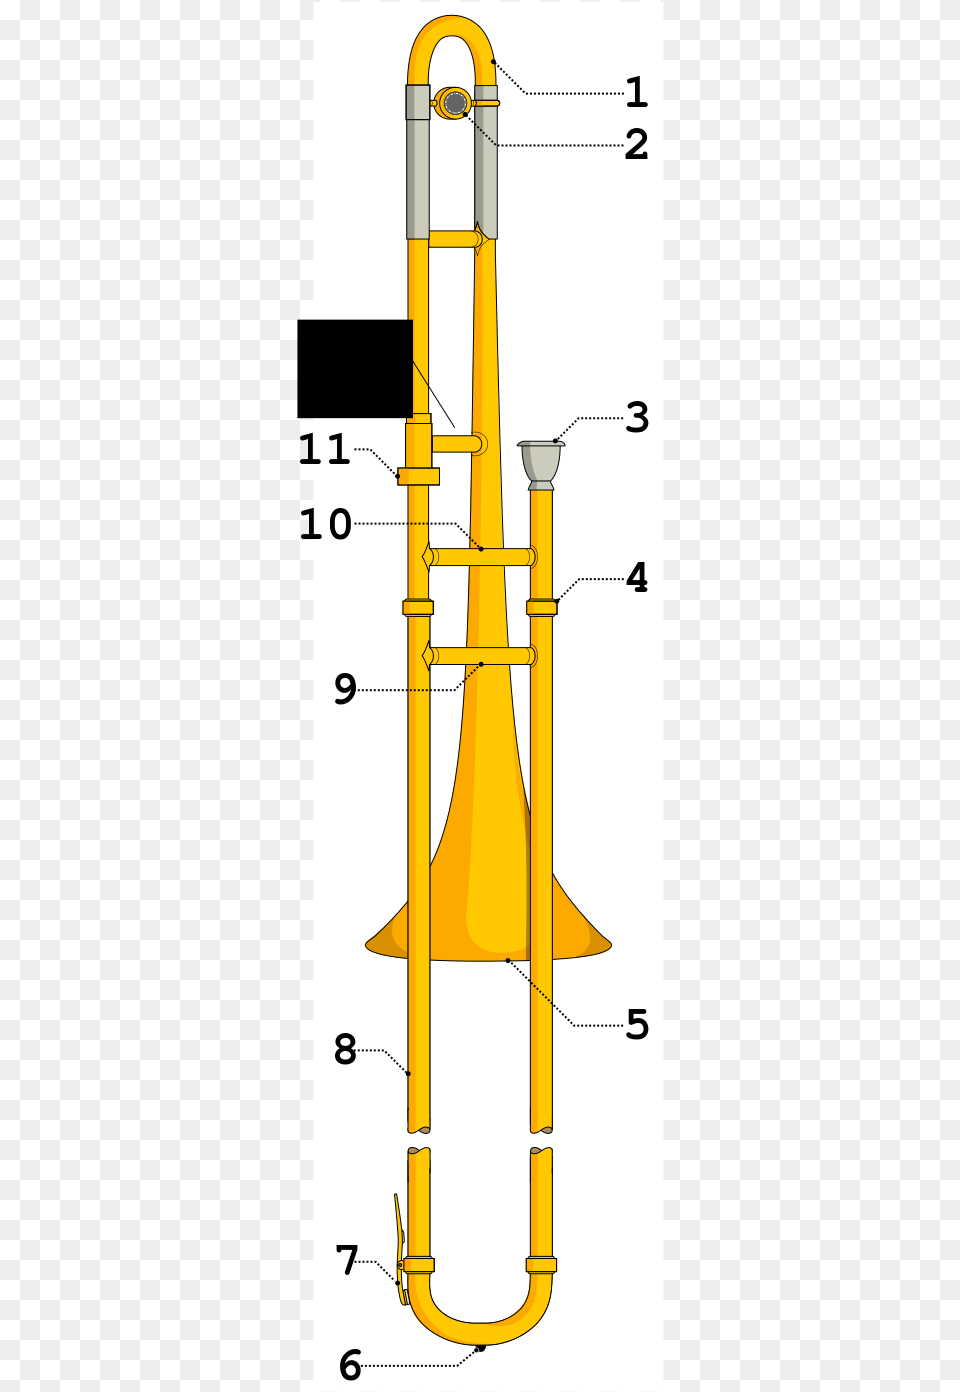 Diagram Of A Trombone, Musical Instrument, Brass Section, Smoke Pipe Png Image